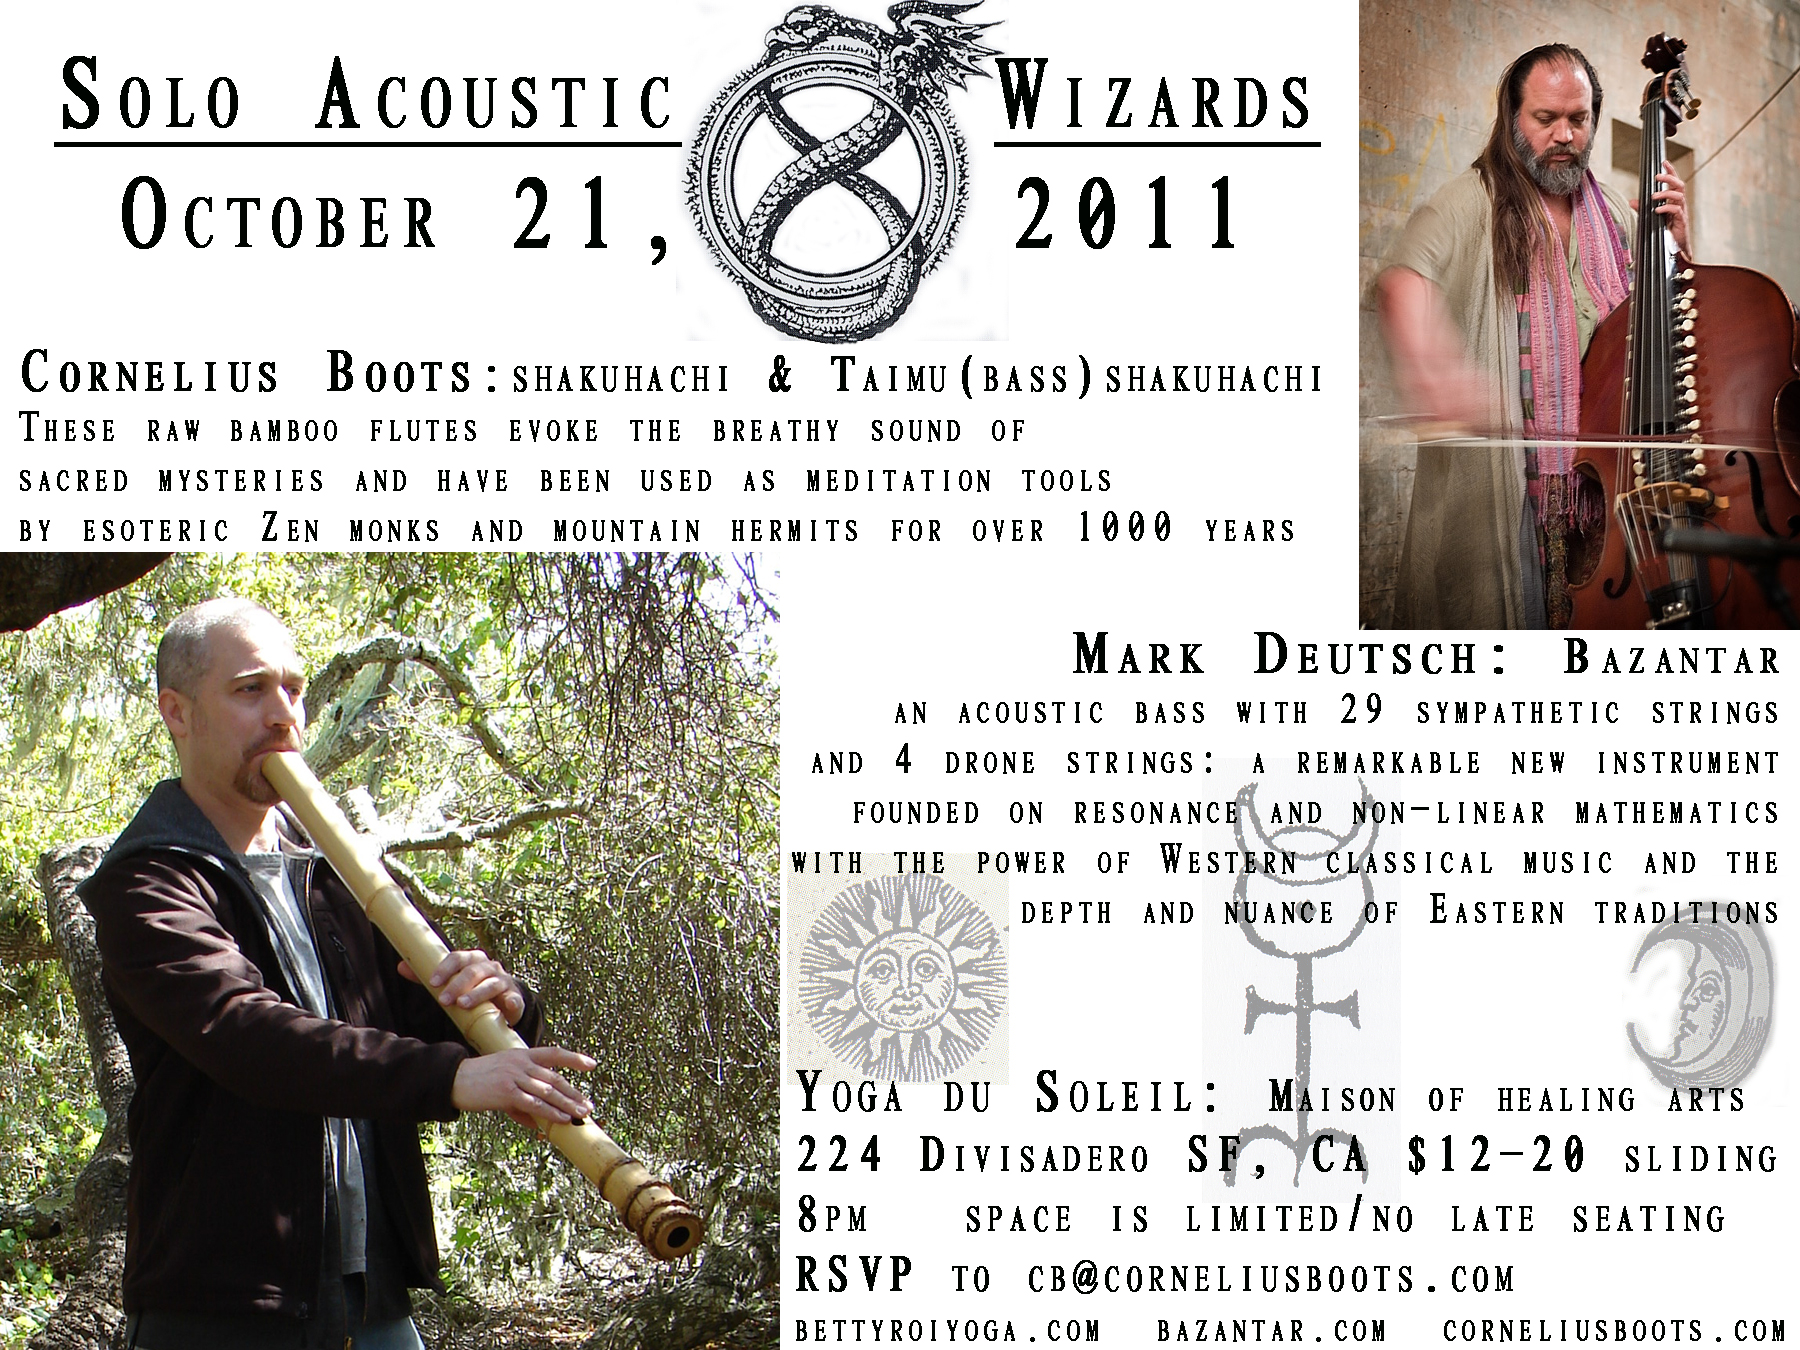 Solo Acoustic Wizards